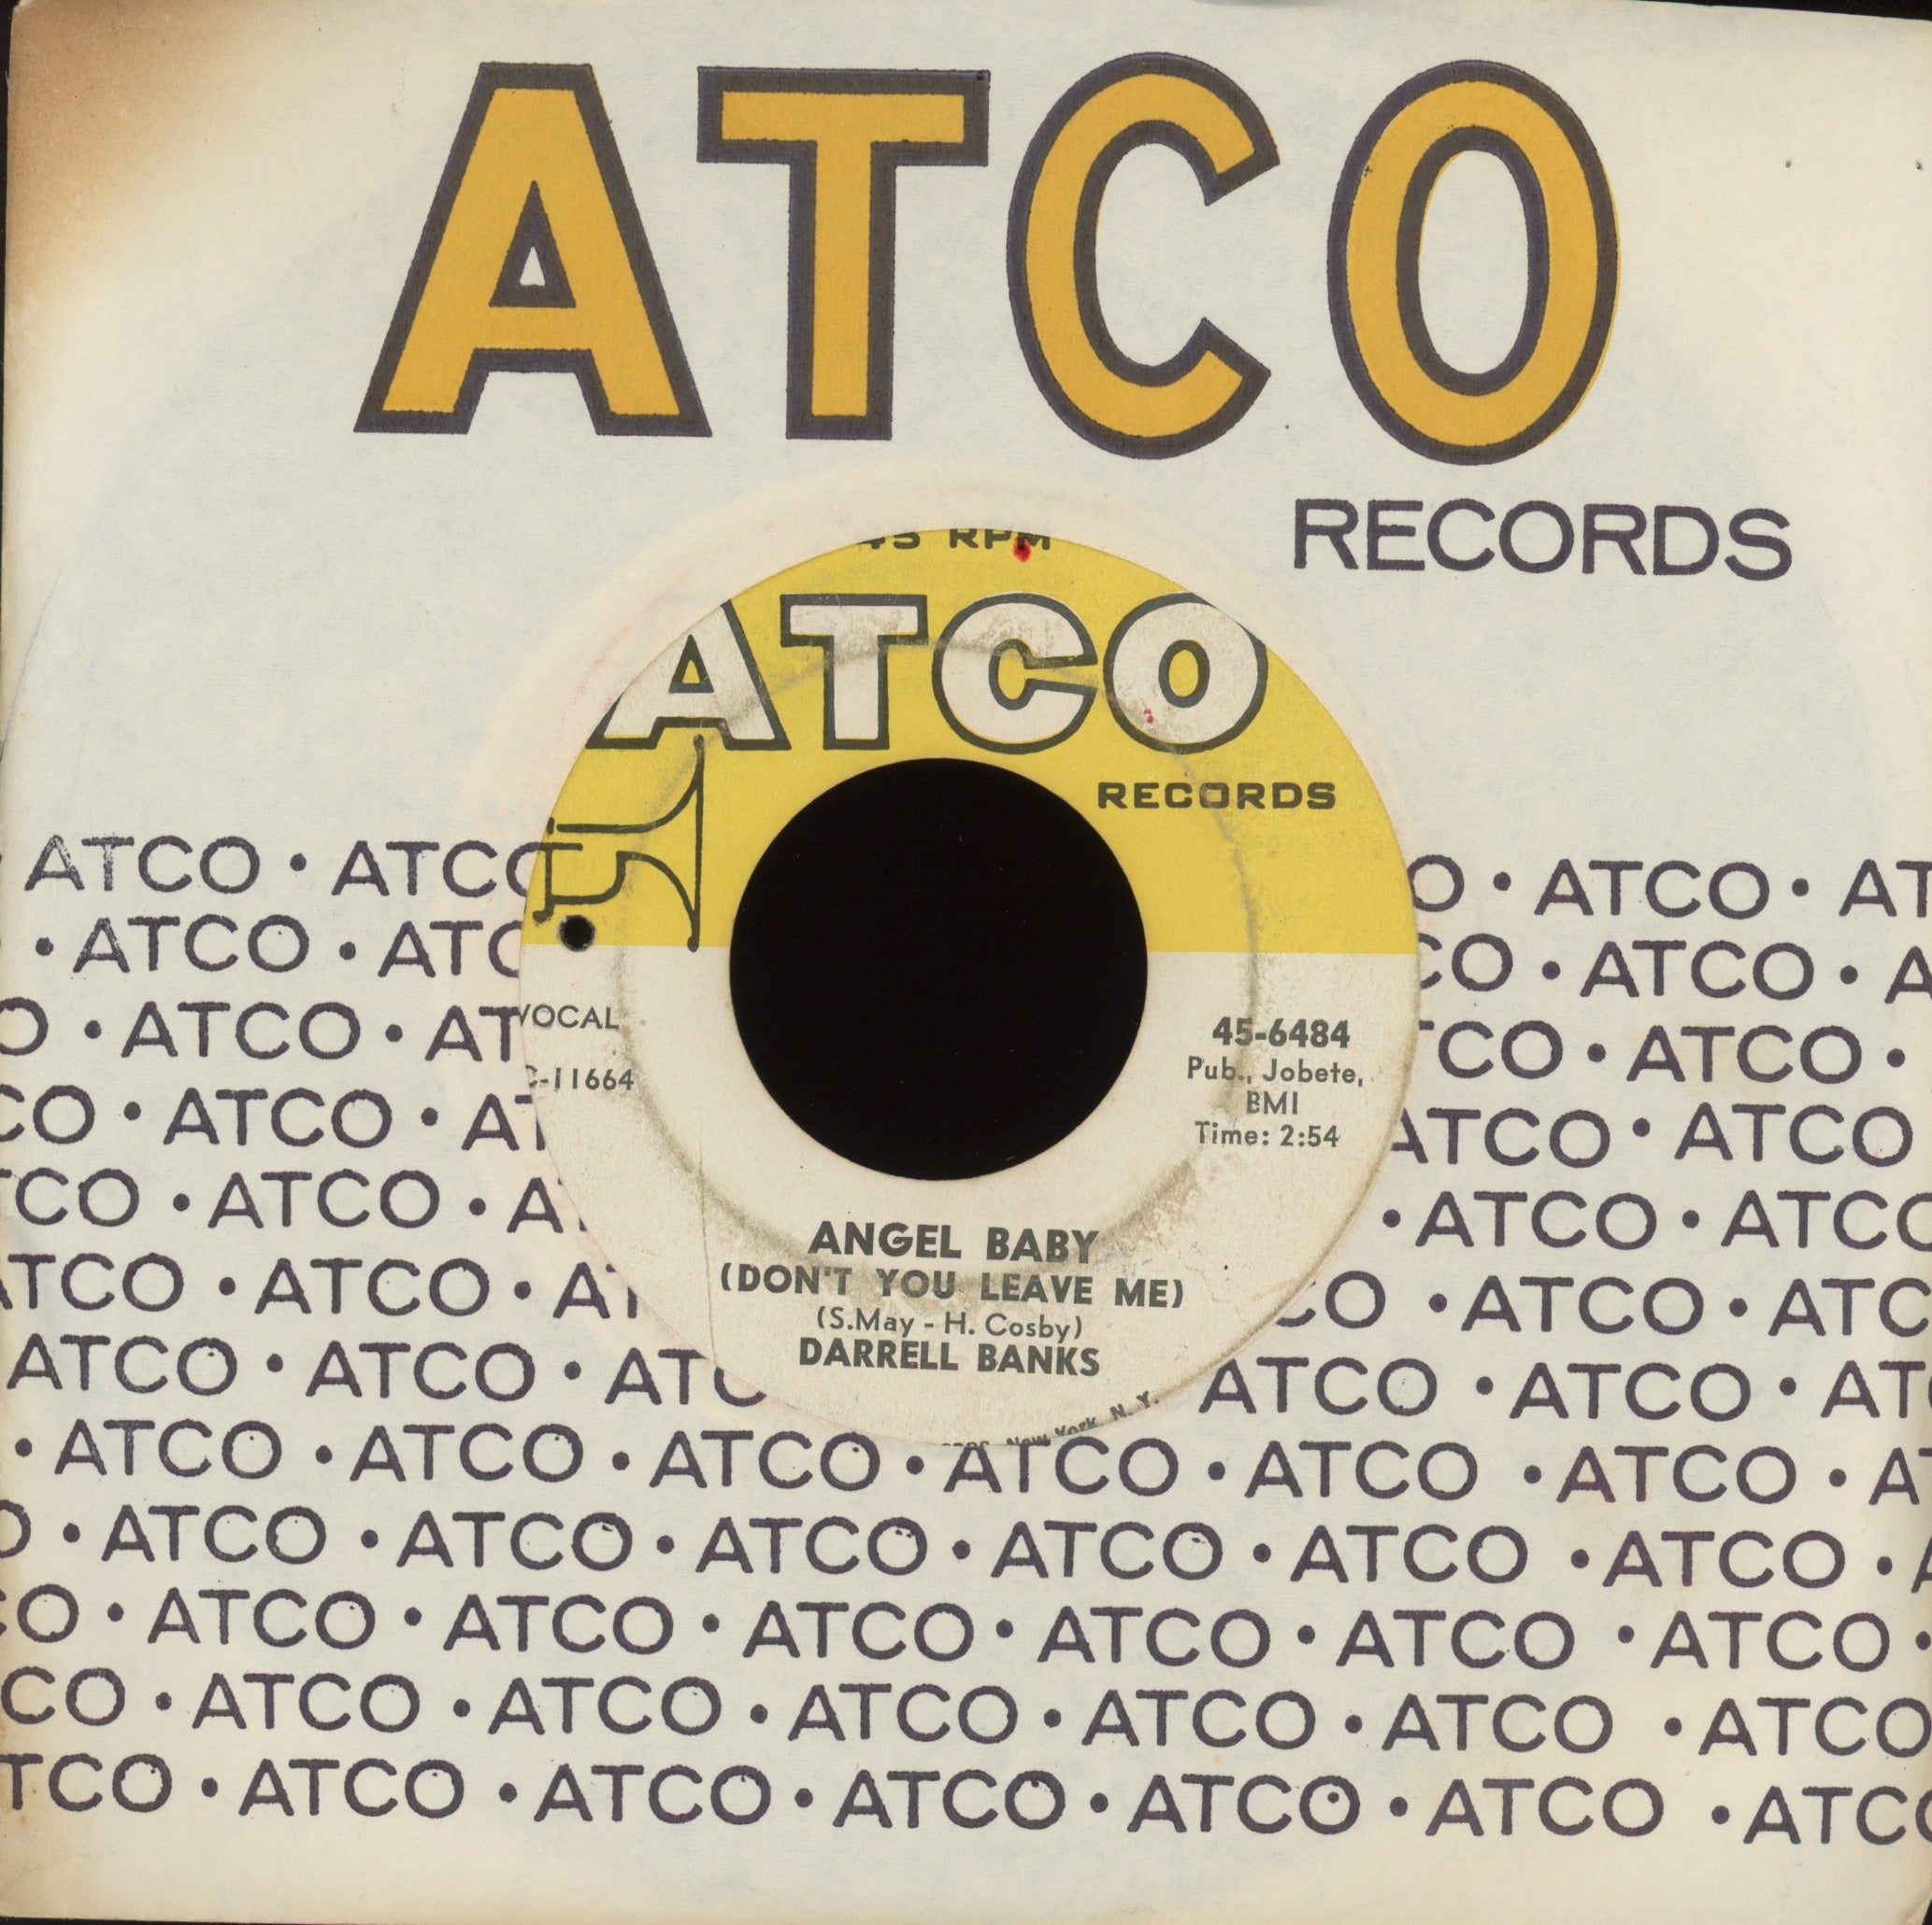 Darrell Banks - Angel Baby (Don't You Leave Me) on Atco Northern Soul 45